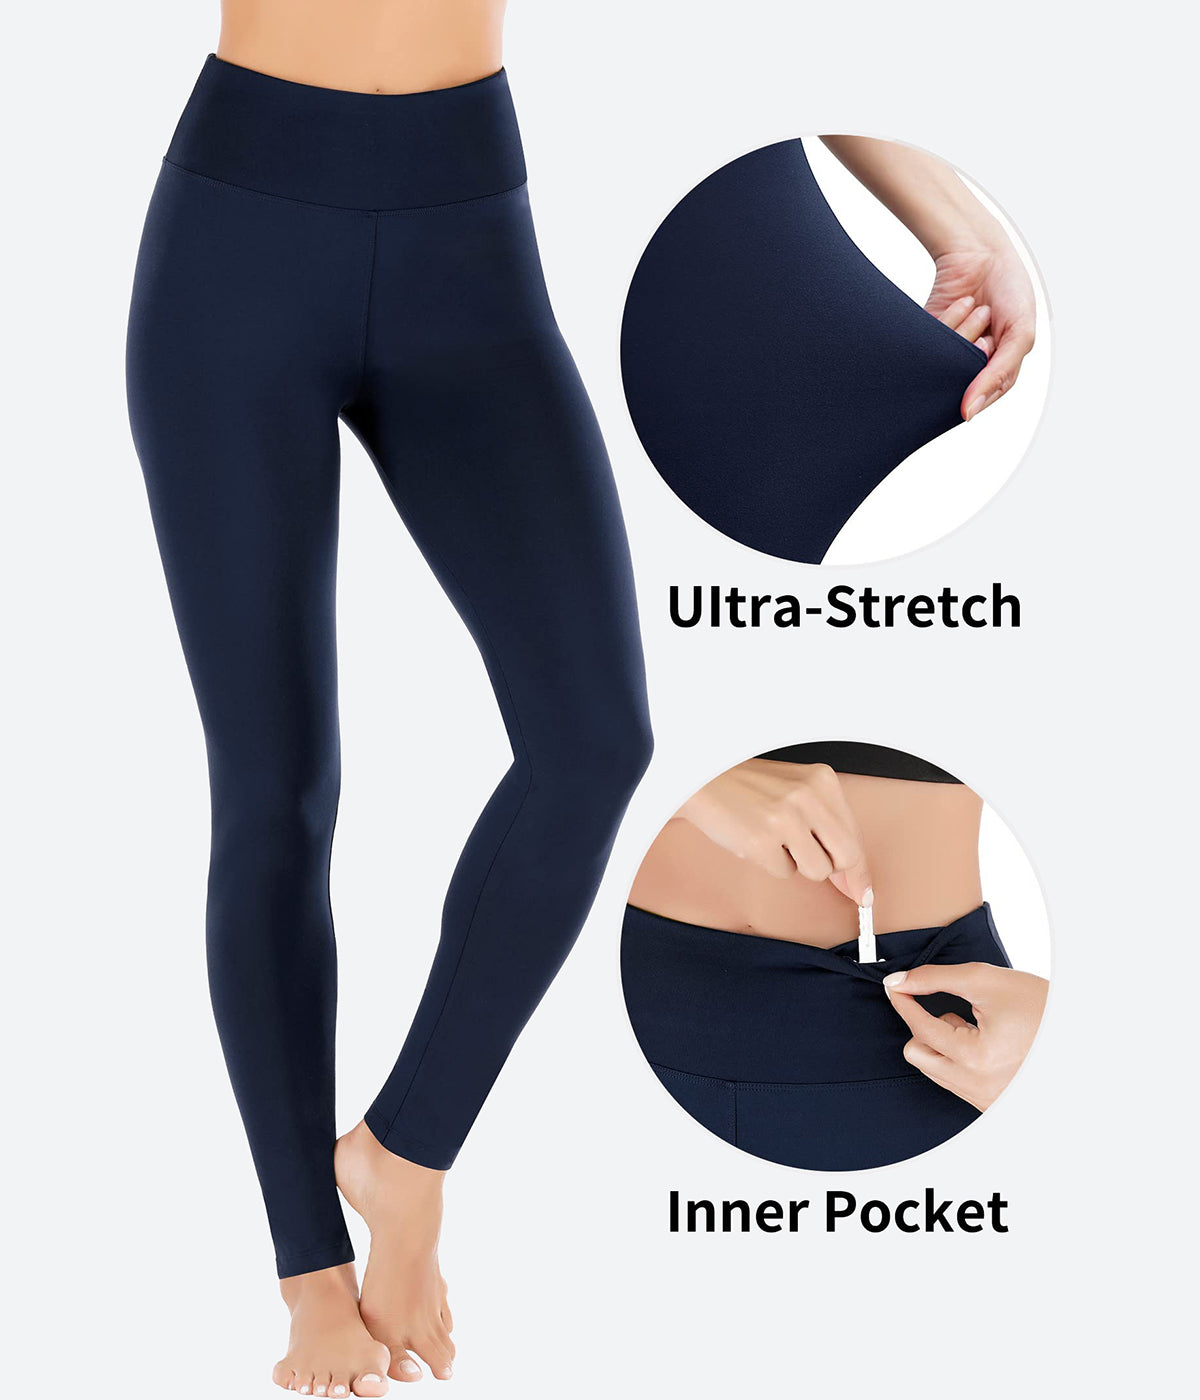 Heathyoga Women's Yoga Pants with Pockets for Nepal